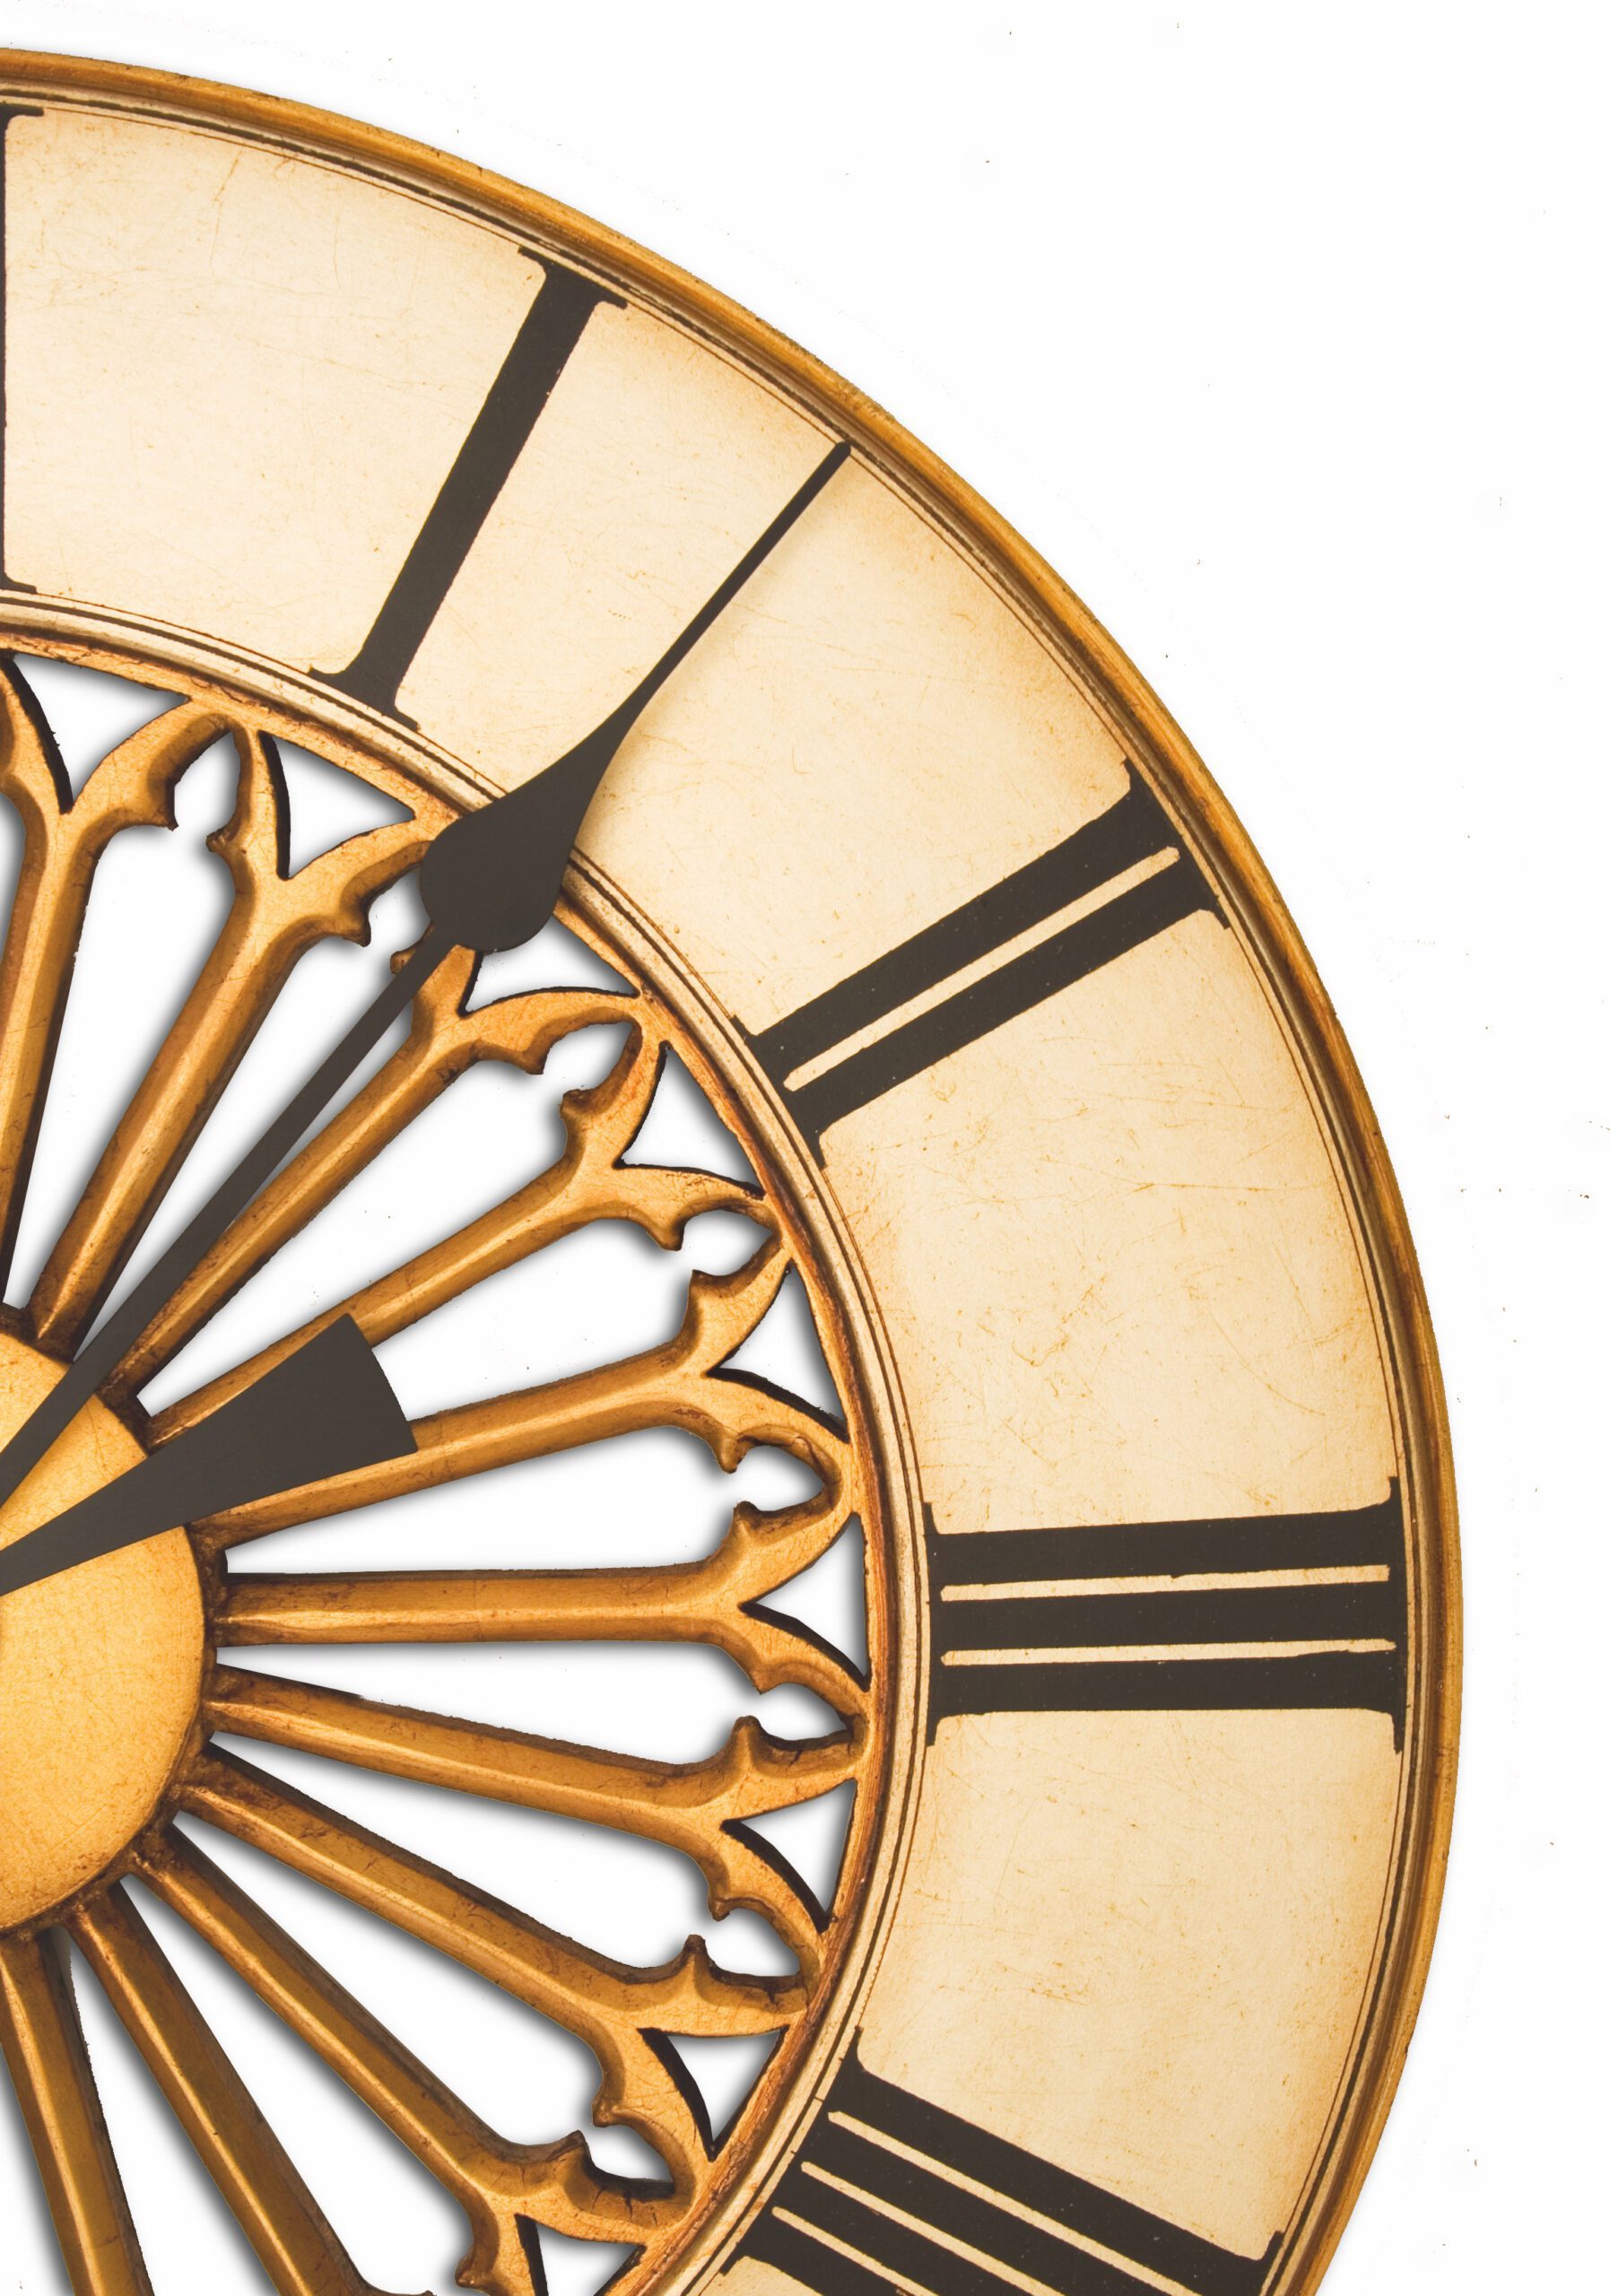 Rose window styled Gothic Round Clock in gold and silver leaf